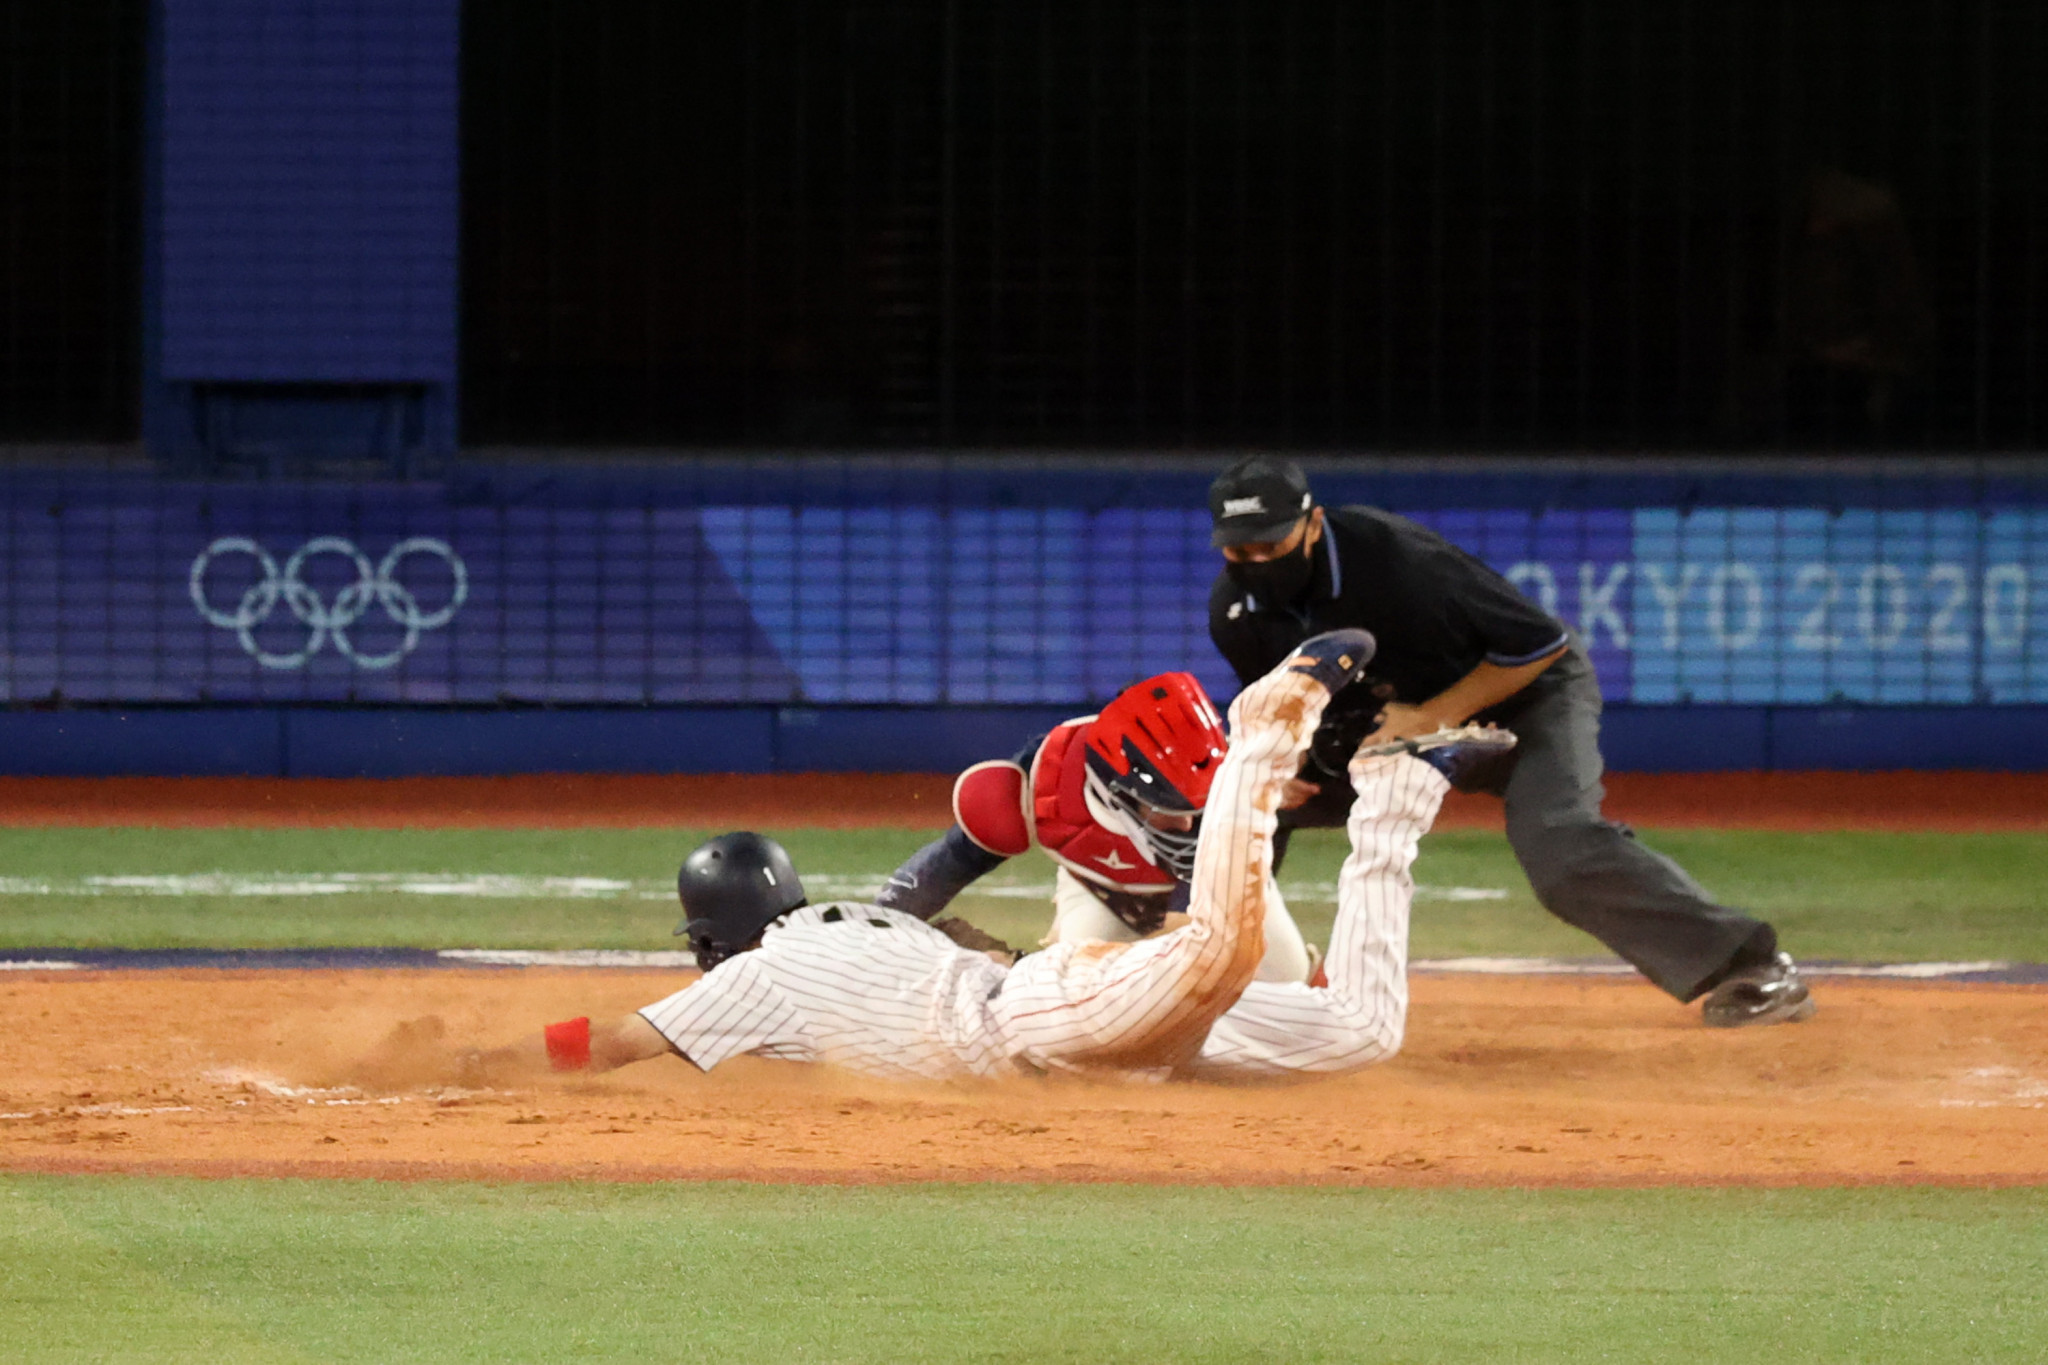 Baseball Softball: Olympic history, rules, latest updates and upcoming  events for the Olympic sport